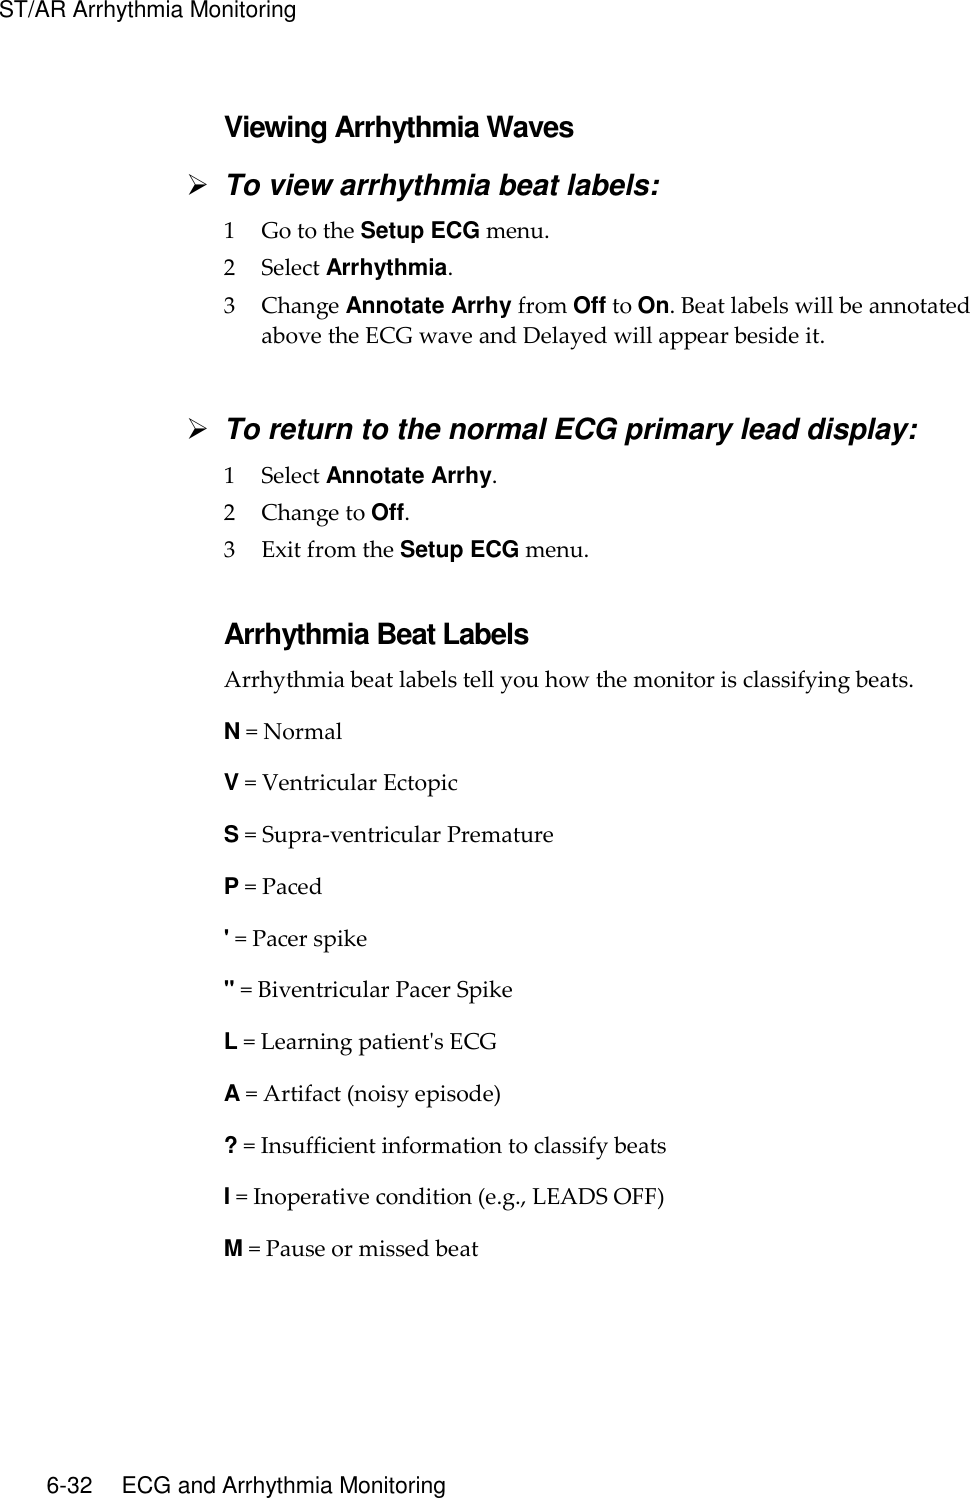 ST/AR Arrhythmia Monitoring   6-32    ECG and Arrhythmia Monitoring  Viewing Arrhythmia Waves  To view arrhythmia beat labels: 1 Go to the Setup ECG menu. 2 Select Arrhythmia. 3 Change Annotate Arrhy from Off to On. Beat labels will be annotated above the ECG wave and Delayed will appear beside it.   To return to the normal ECG primary lead display: 1 Select Annotate Arrhy. 2 Change to Off. 3 Exit from the Setup ECG menu.  Arrhythmia Beat Labels Arrhythmia beat labels tell you how the monitor is classifying beats. N = Normal V = Ventricular Ectopic S = Supra-ventricular Premature P = Paced &apos; = Pacer spike &quot; = Biventricular Pacer Spike L = Learning patient&apos;s ECG A = Artifact (noisy episode) ? = Insufficient information to classify beats I = Inoperative condition (e.g., LEADS OFF) M = Pause or missed beat  